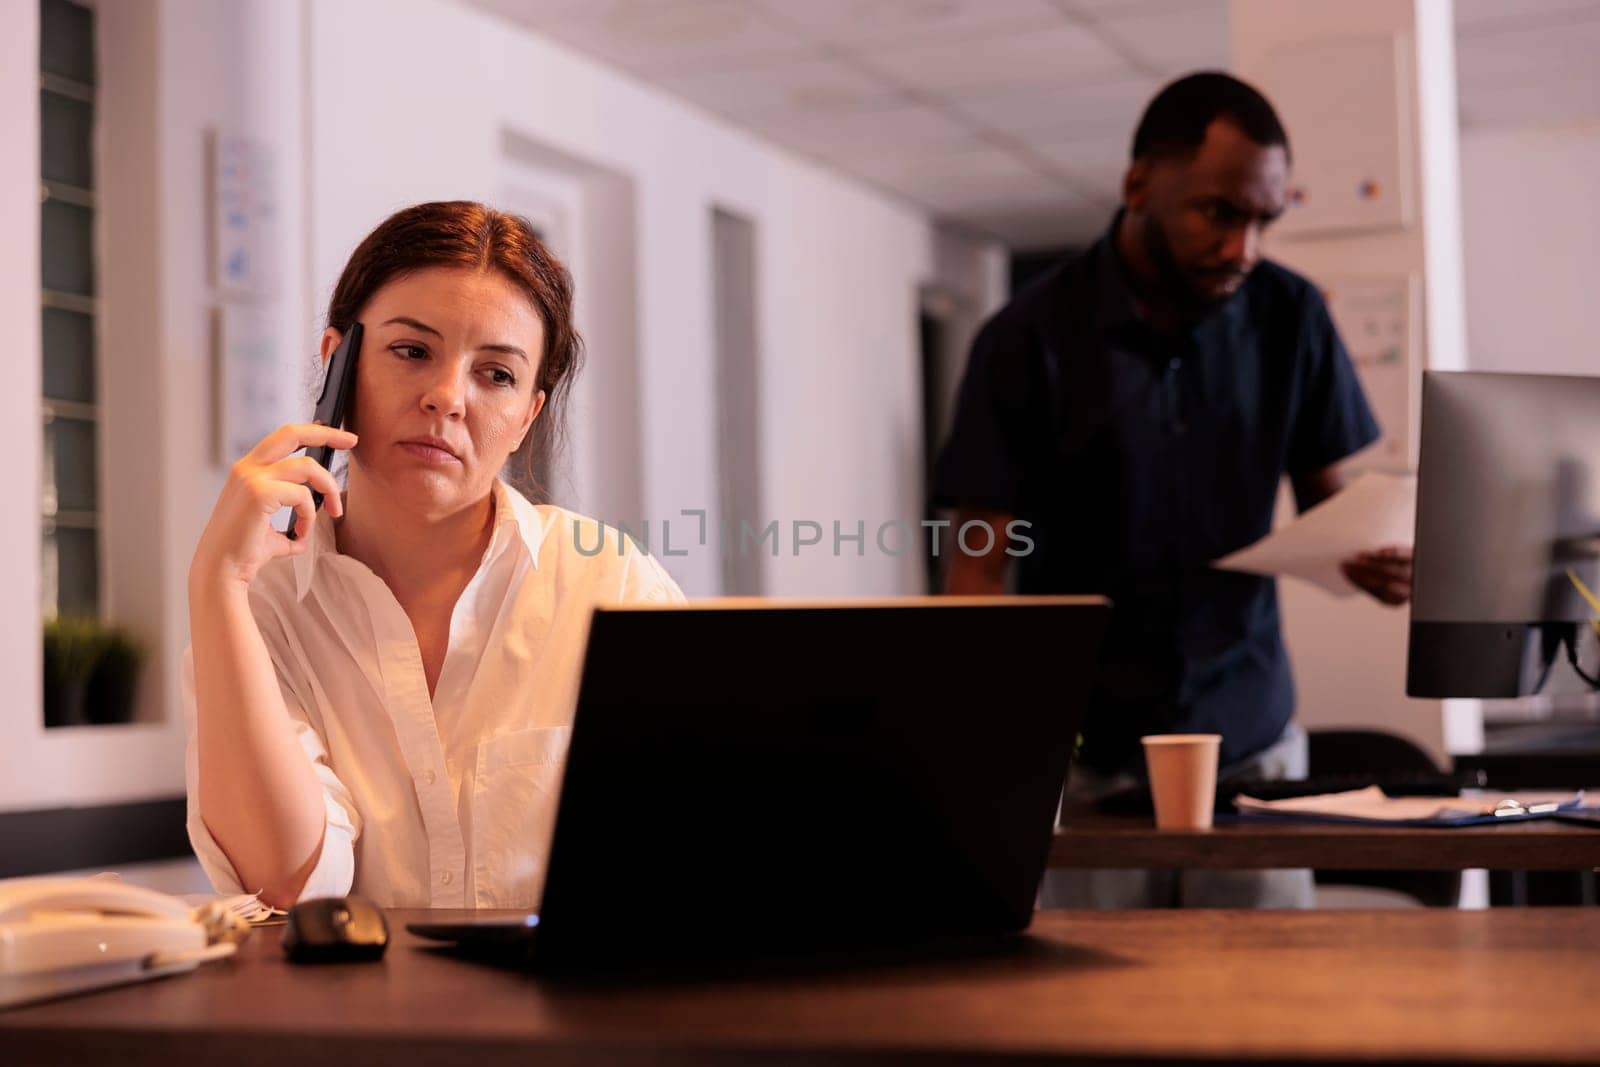 Secretary talking with colleague on smartphone in office by DCStudio